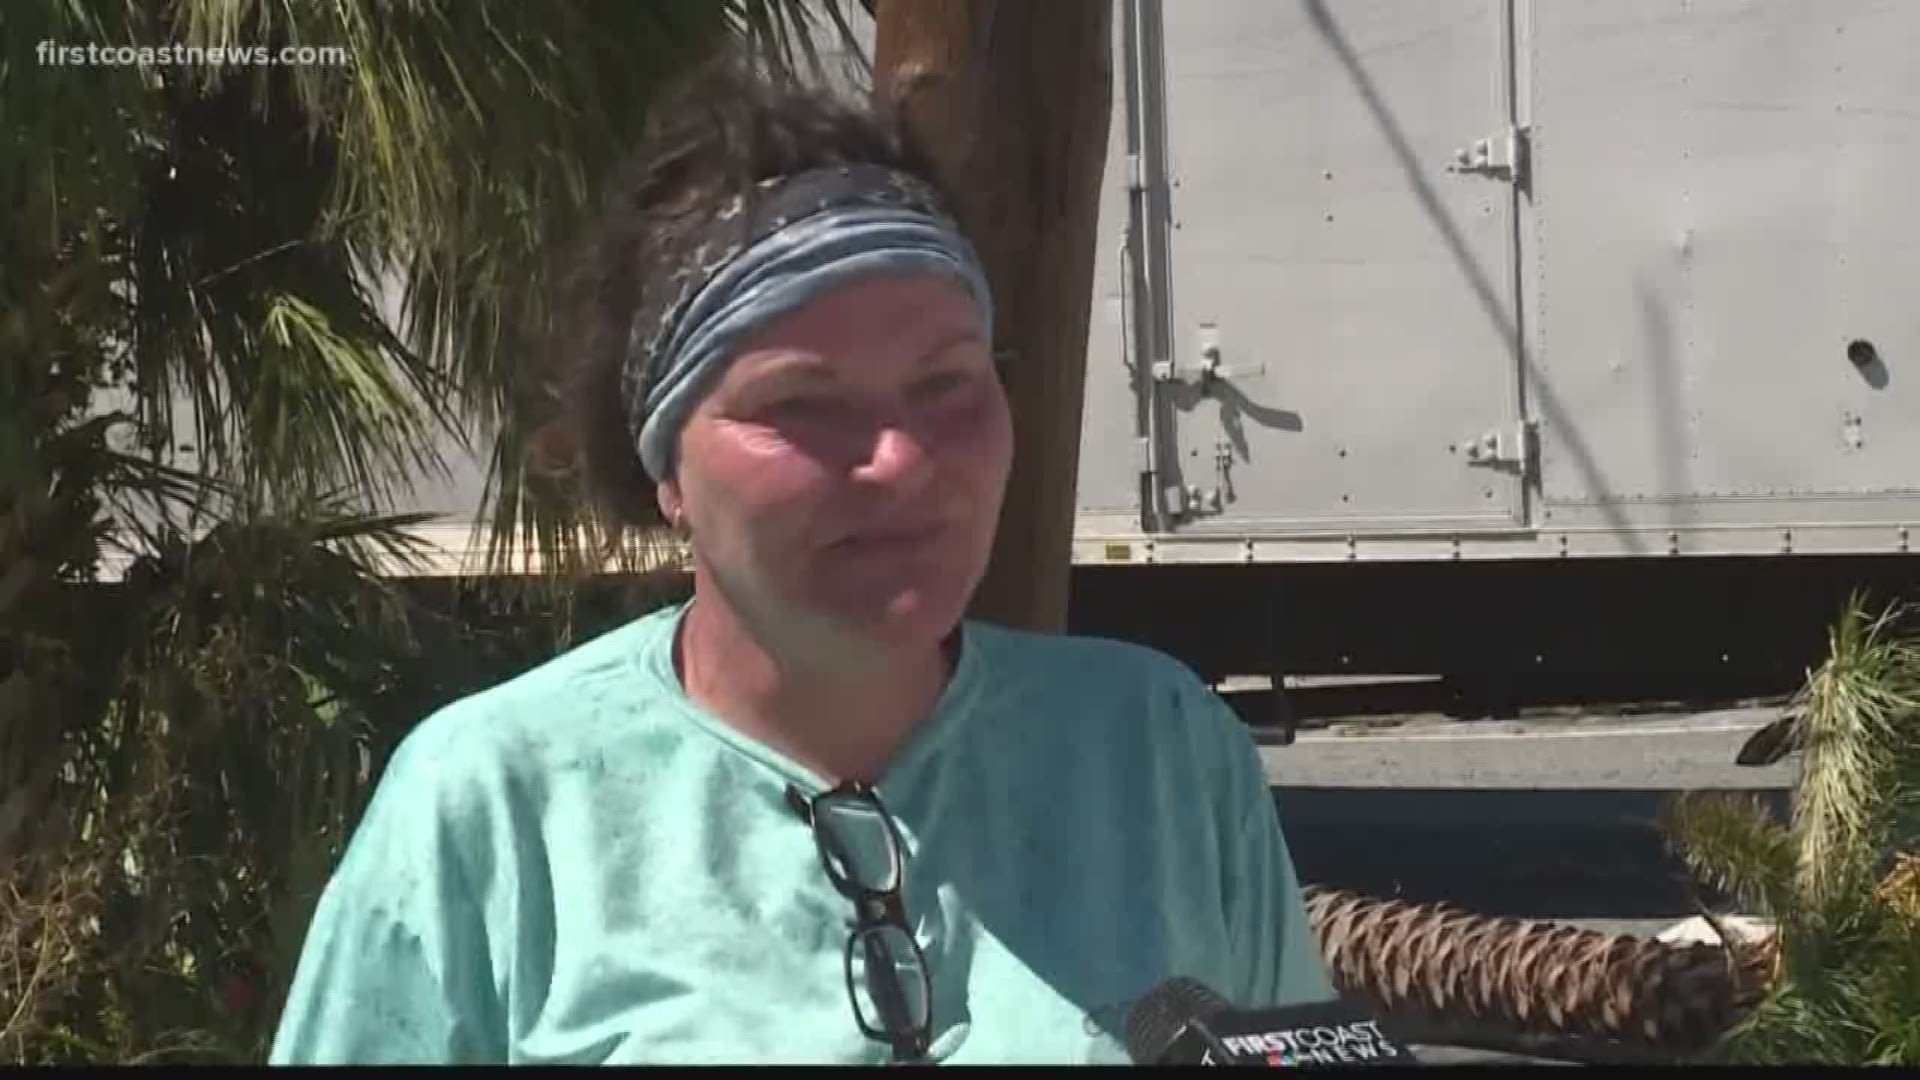 A Mexico Beach woman tells us she just canceled her insurance before Hurricane Michael hit, but she's still just thankful to be alive.